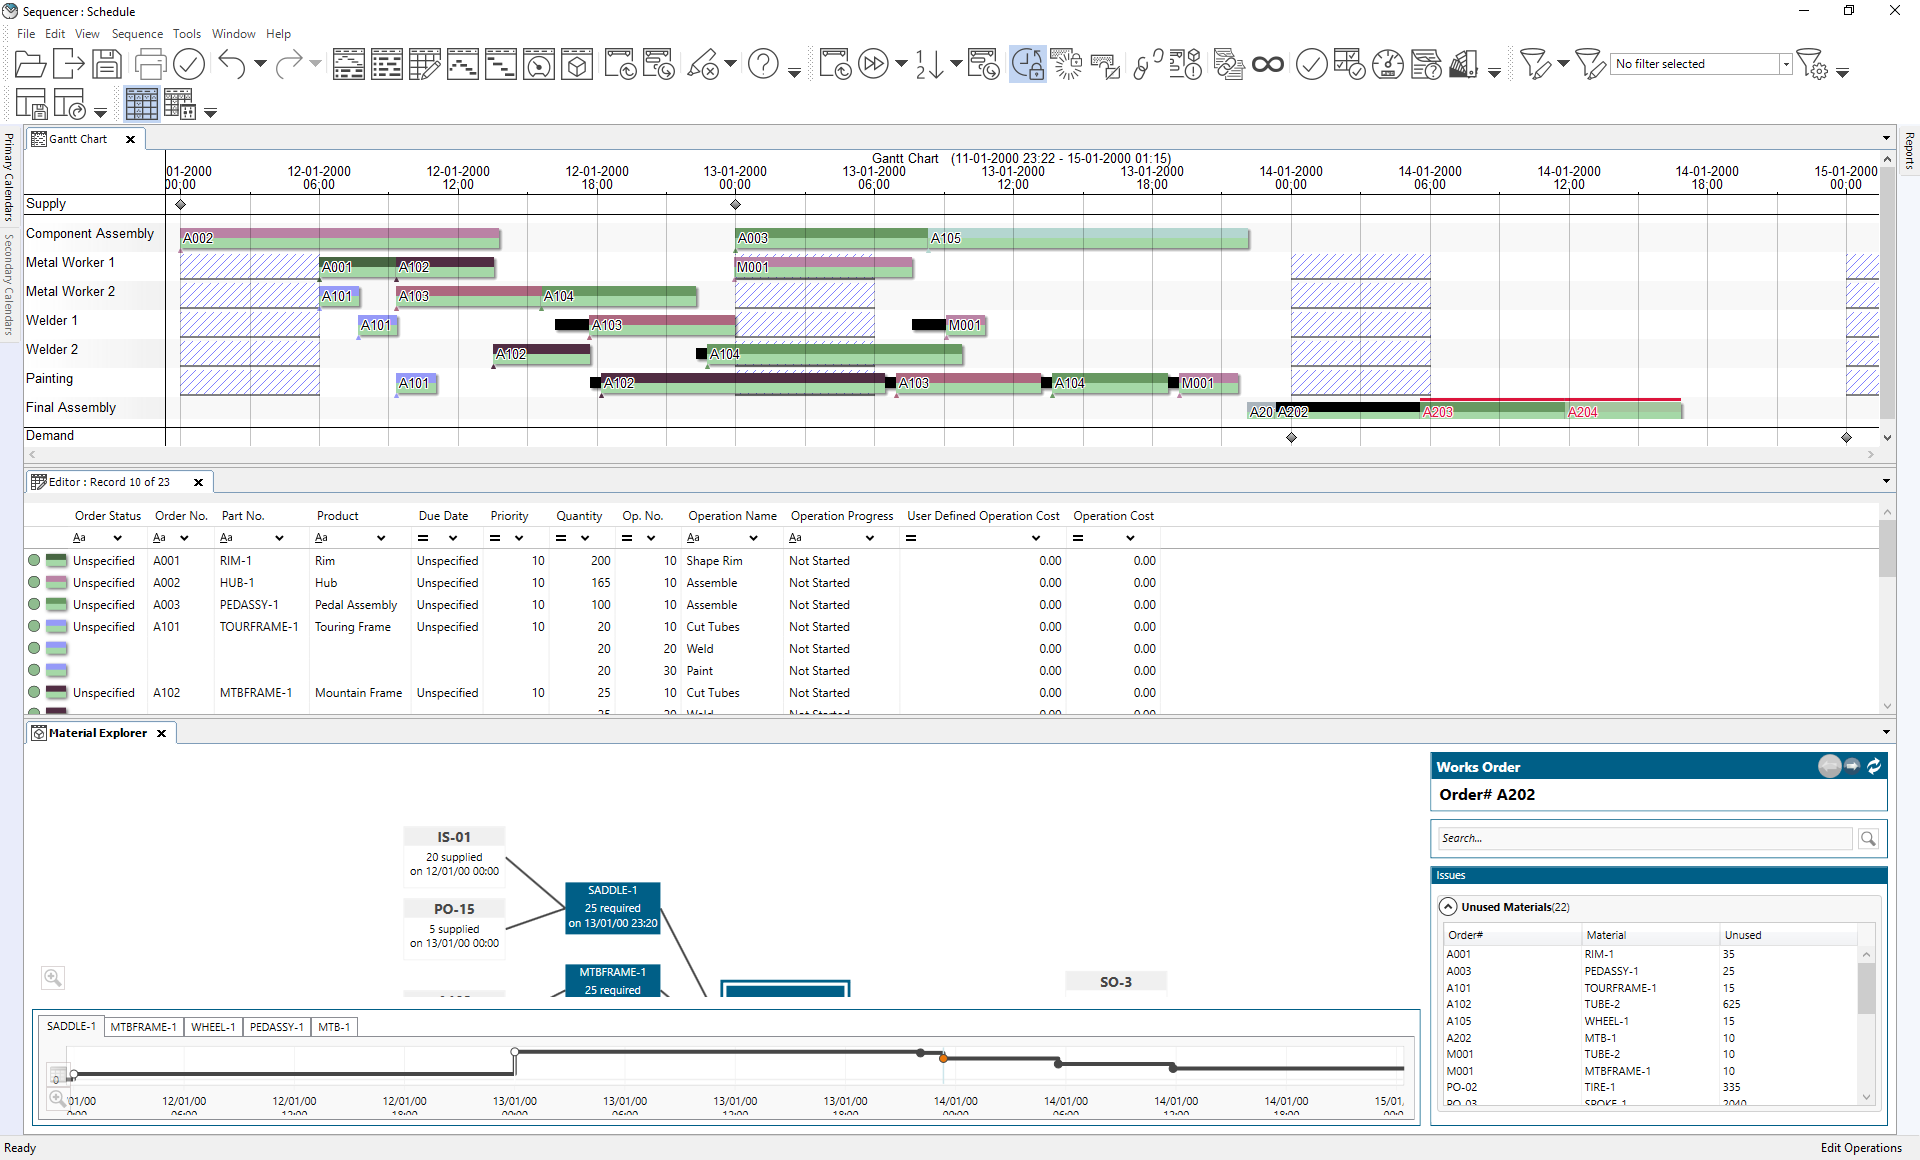 Overview with the Gantt chart, Editor and Material Explorer windows open